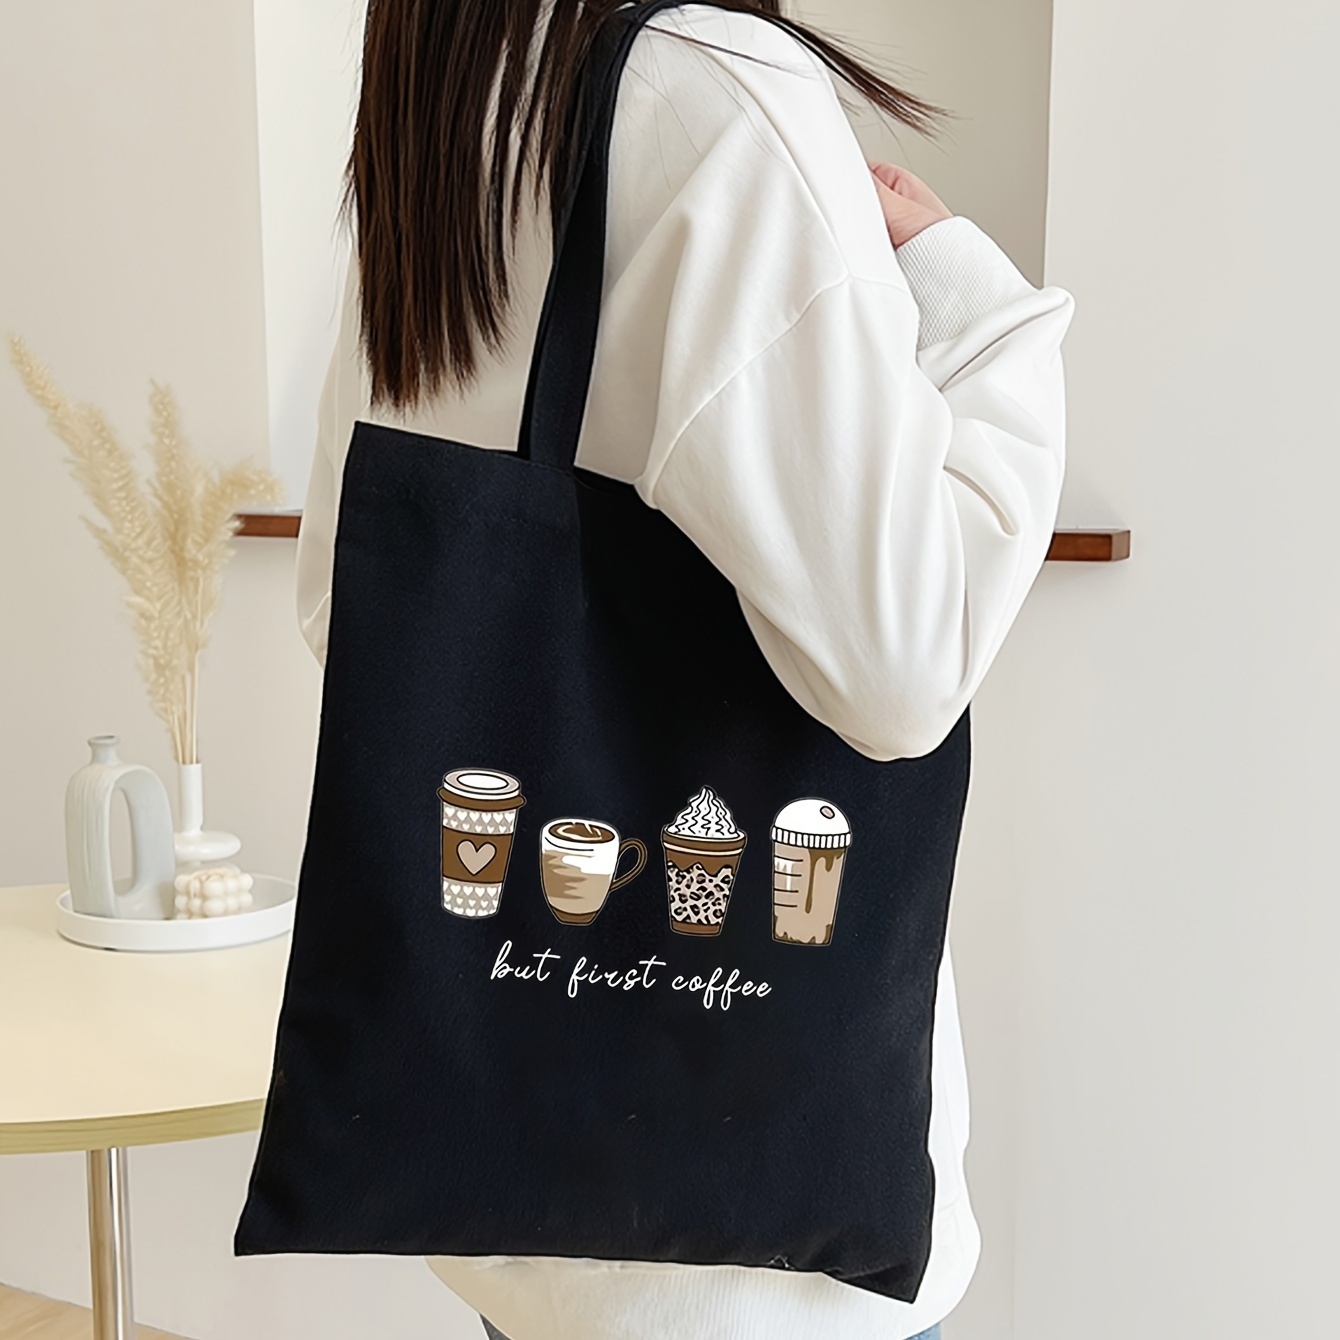 

Canvas Tote Bag For Women, "but First Coffee" Print, Stylish Large Reusable Shopping Bag, Convenient Travel Storage